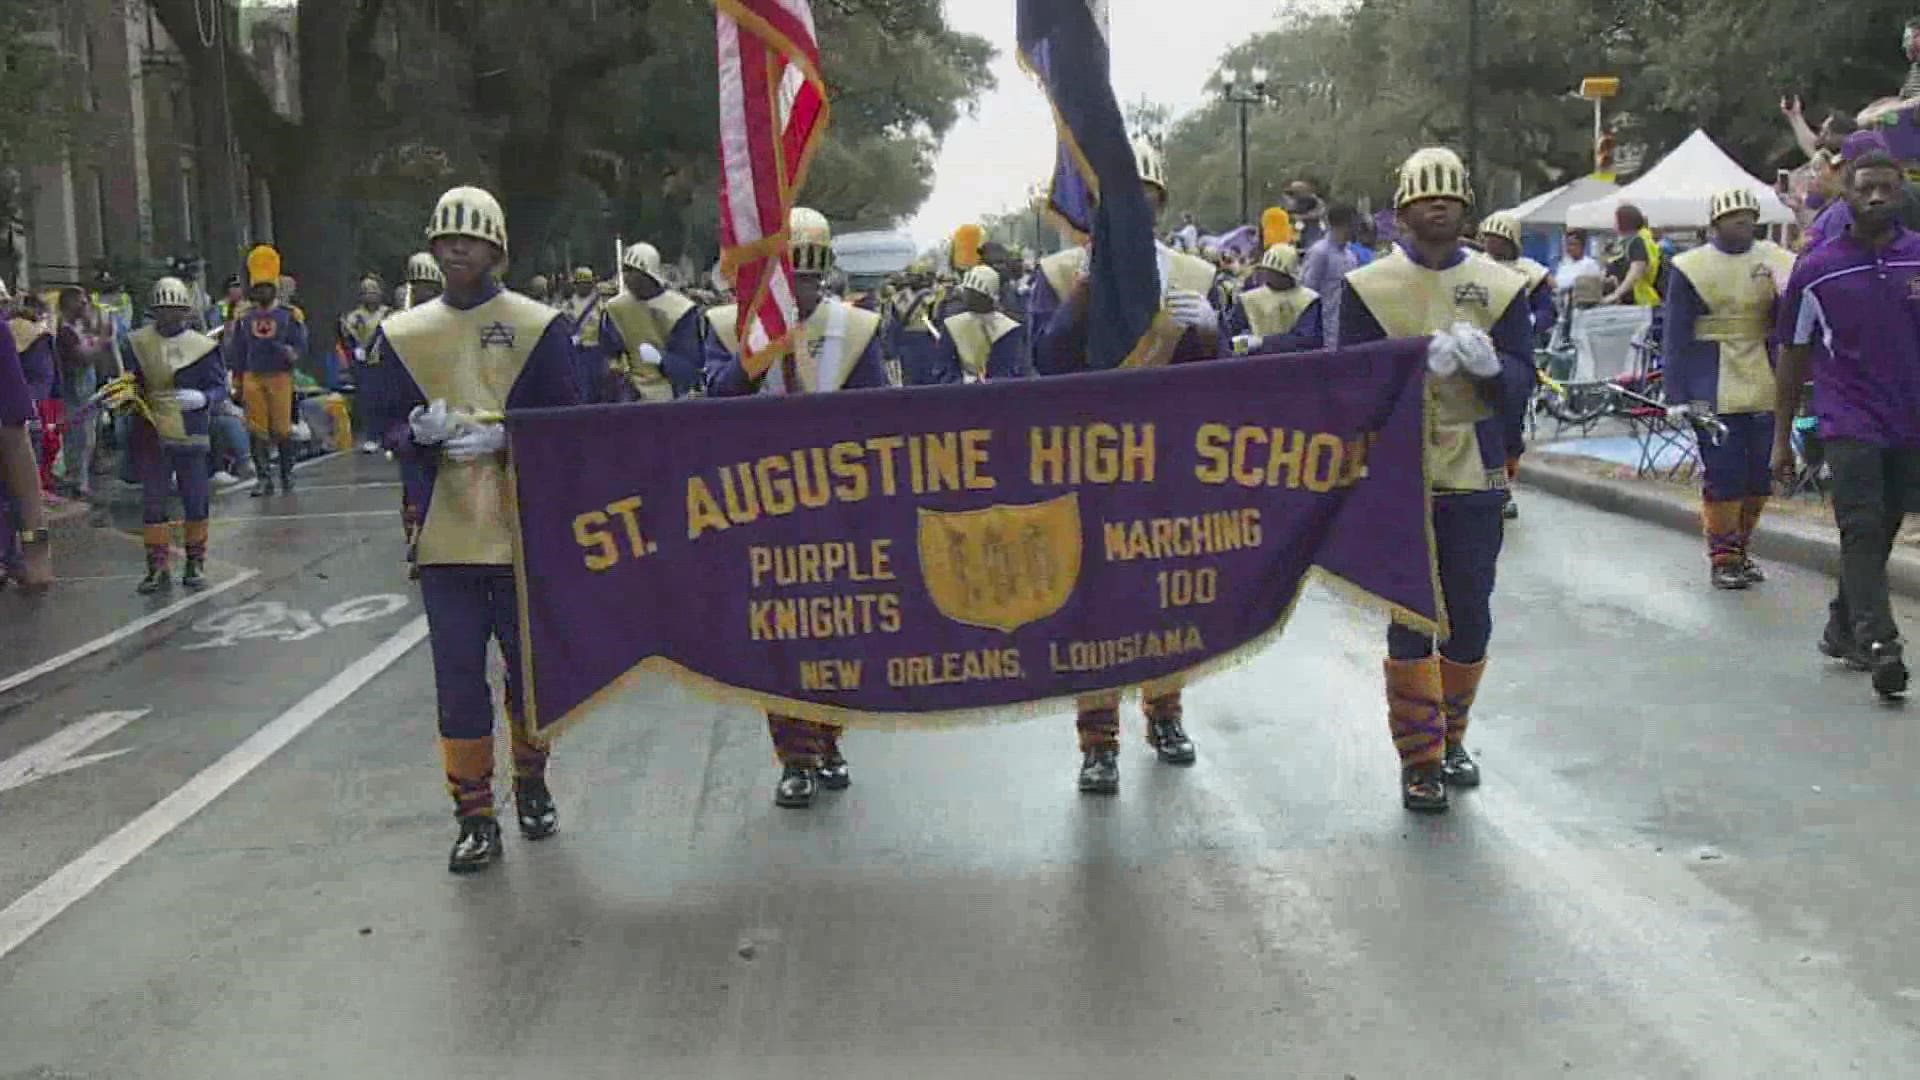 As Rex celebrates 150 years they also highlight and celebrate the bond with the St. Augustine High school Marching 100 band.